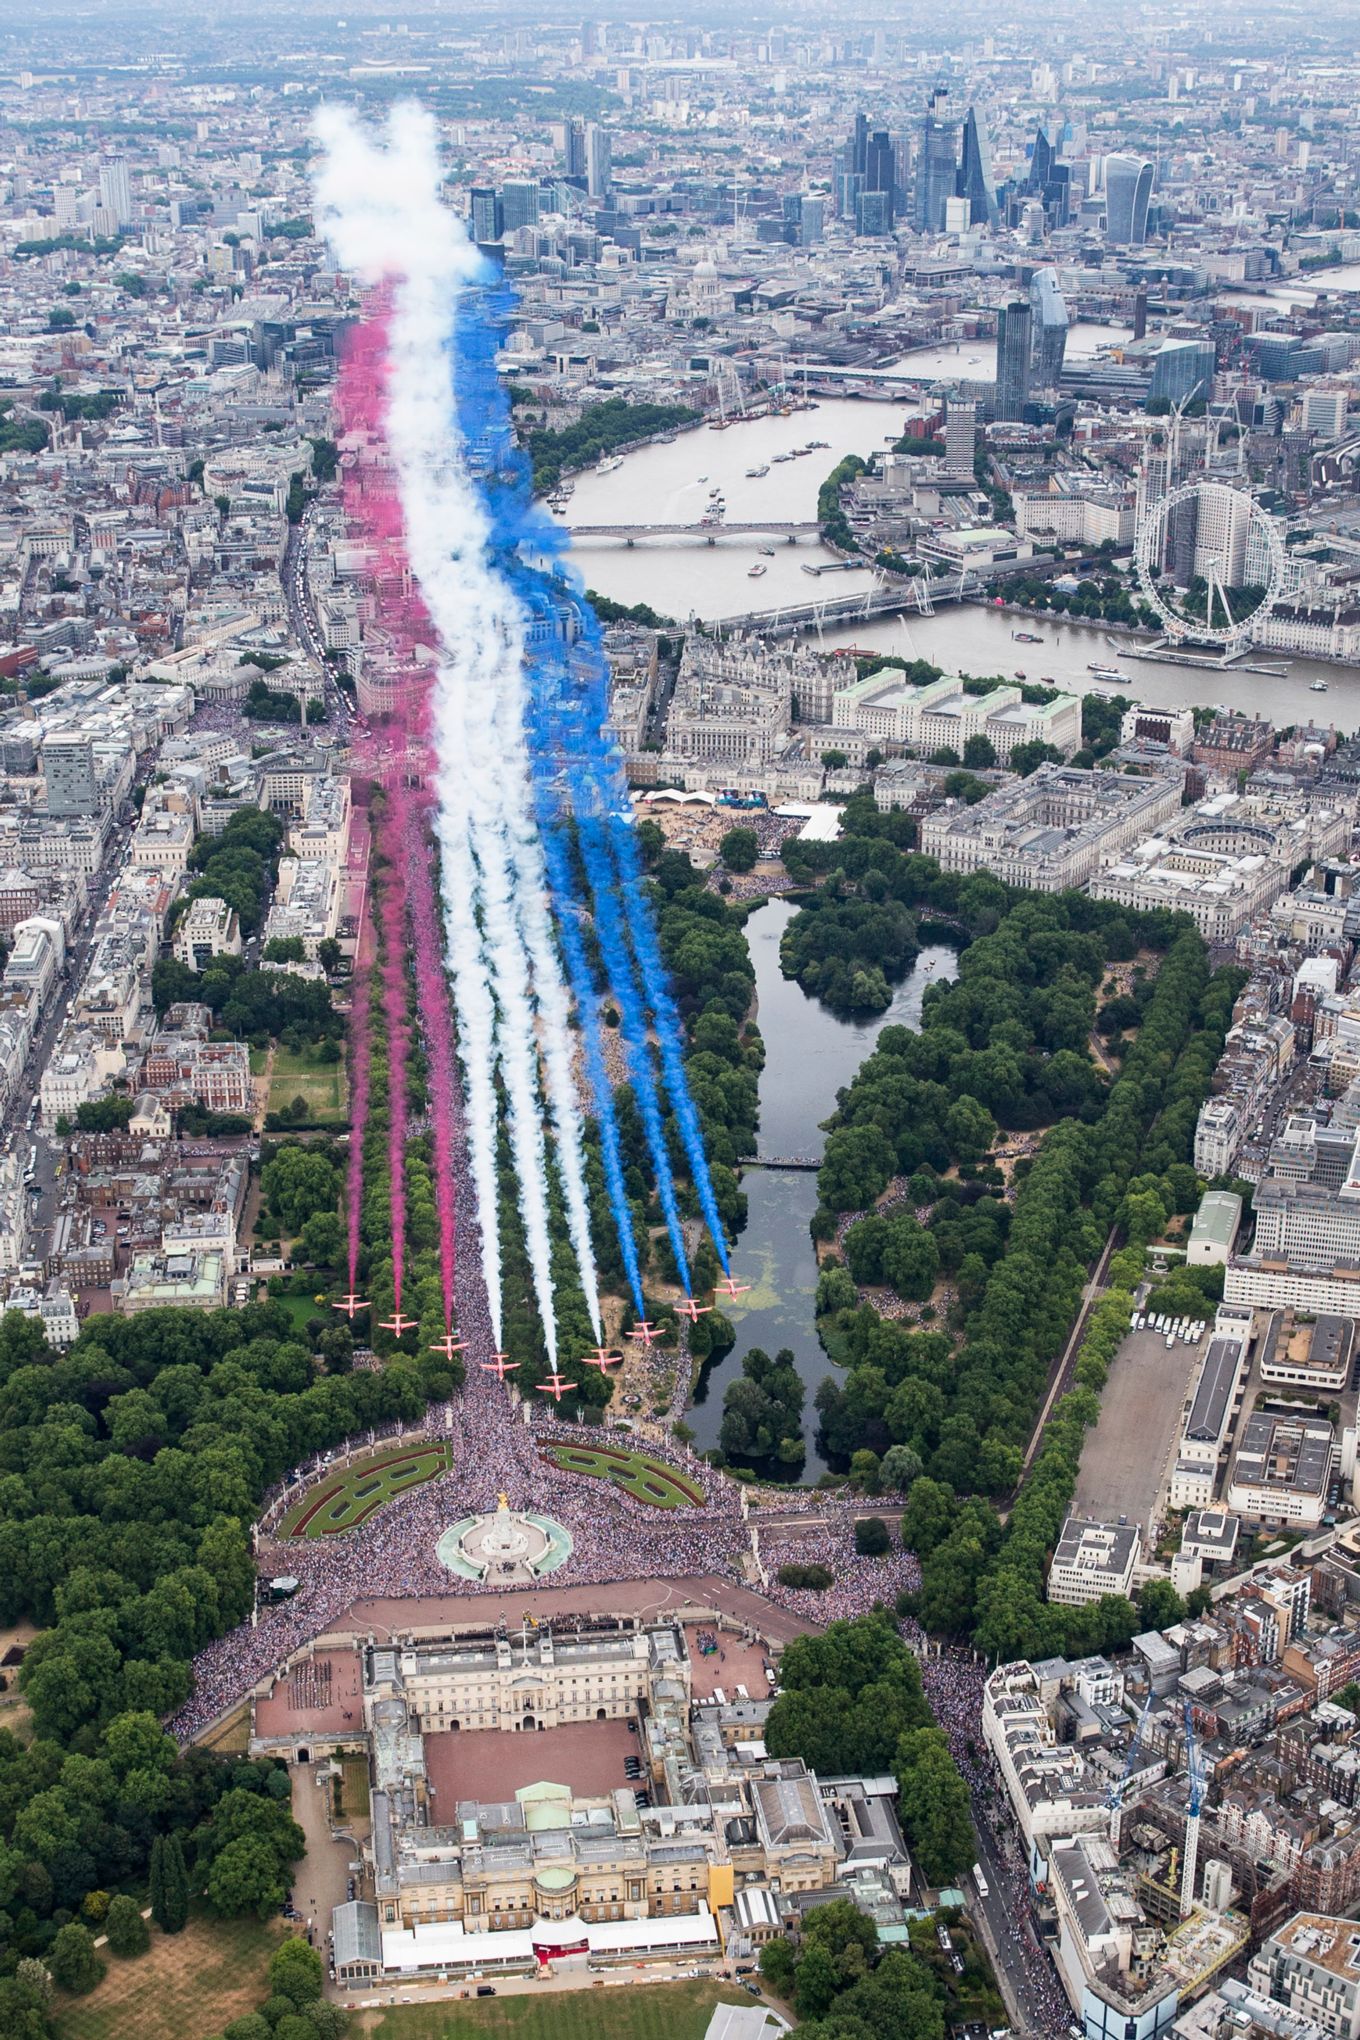 RAF100: Sqn Ldr Pert led the Red Arrows for the celebrations over London.